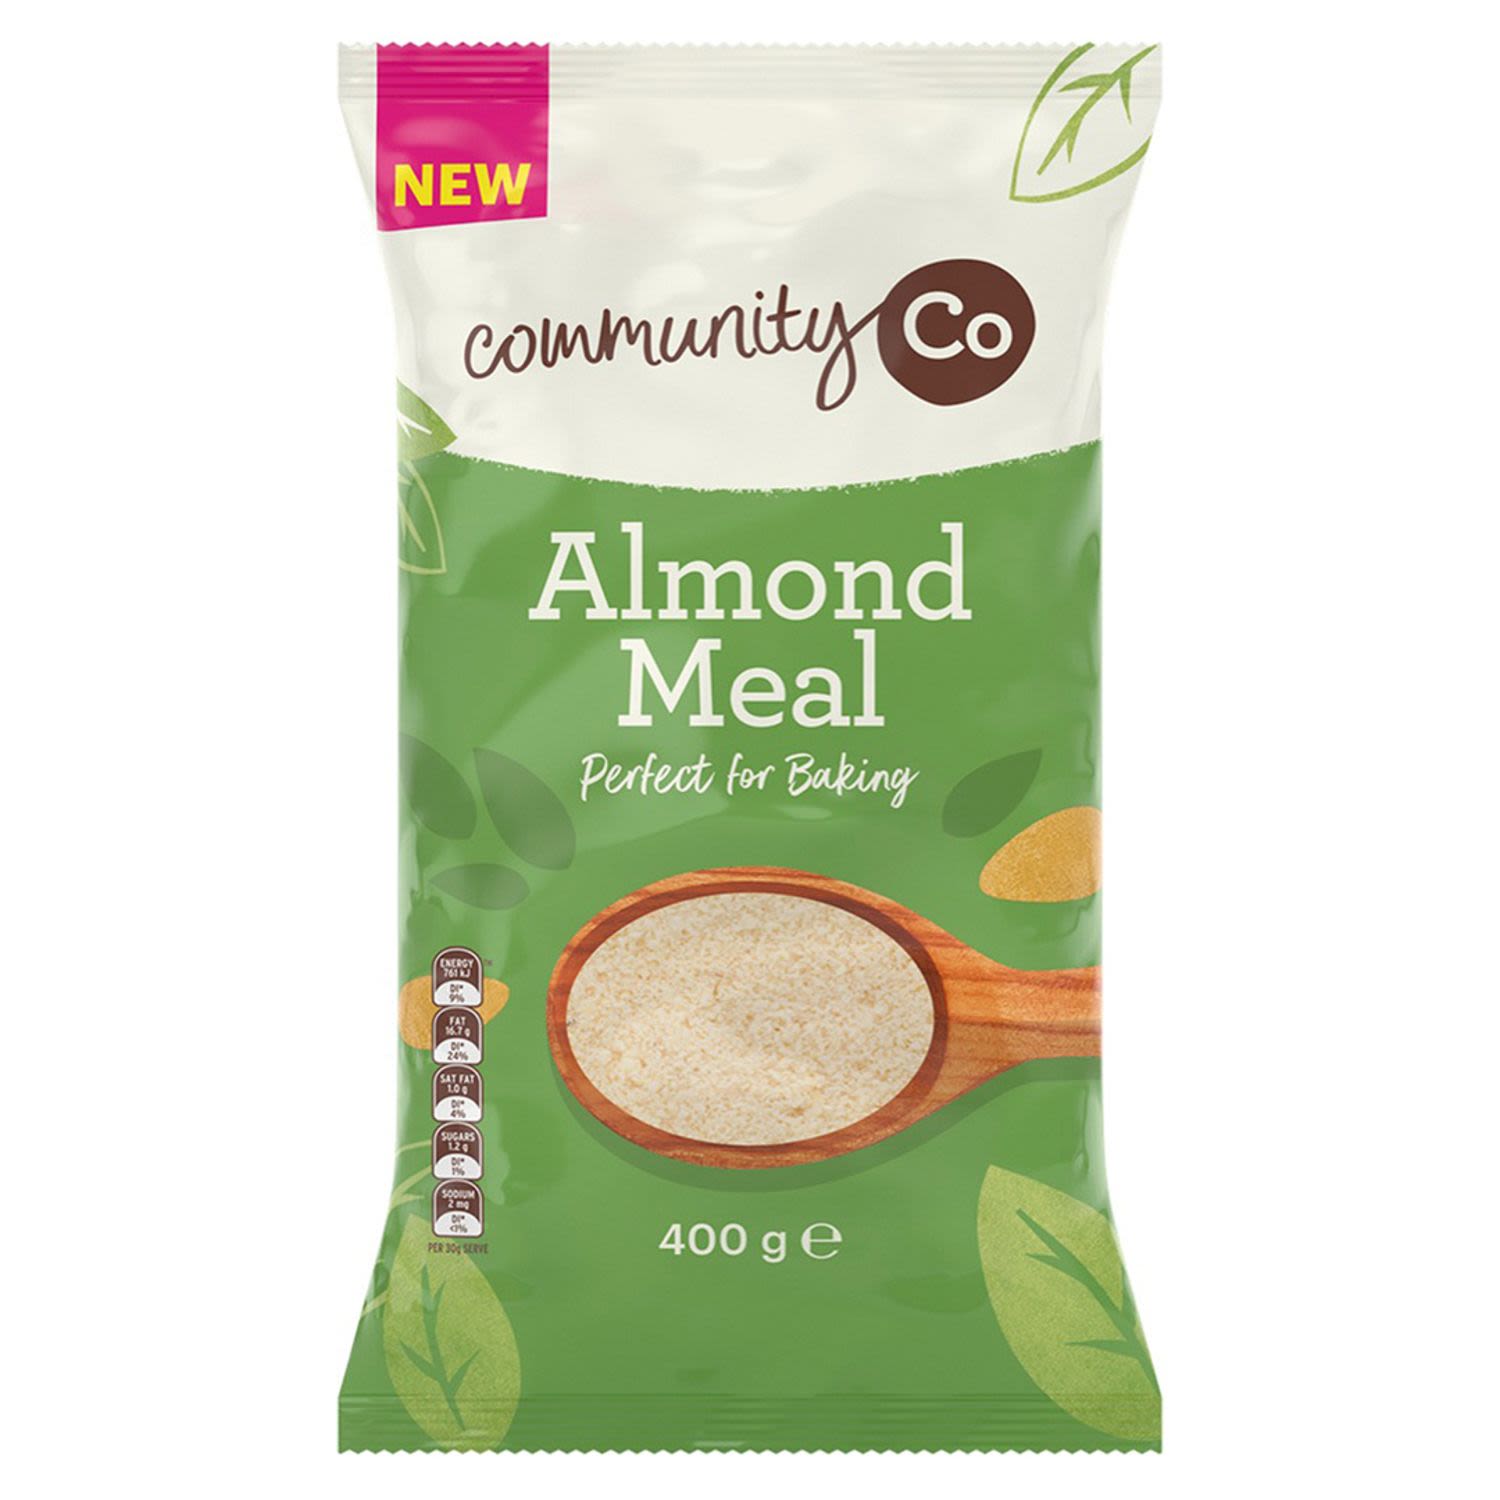 Community Co Almond Meal 400gm